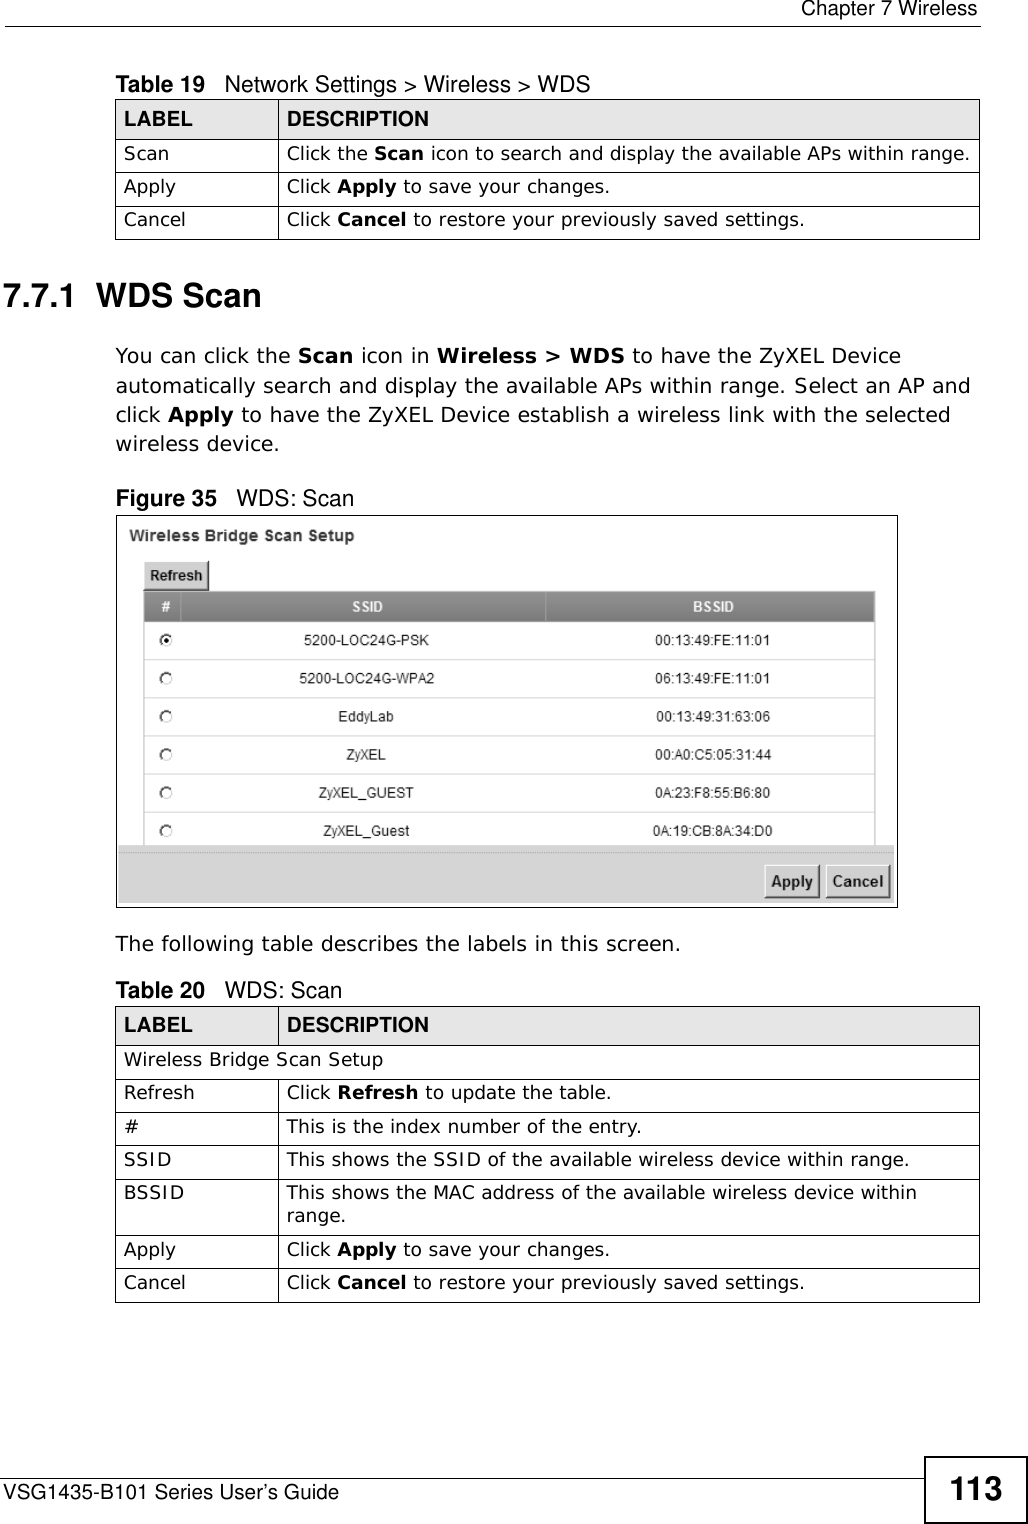  Chapter 7 WirelessVSG1435-B101 Series User’s Guide 1137.7.1  WDS ScanYou can click the Scan icon in Wireless &gt; WDS to have the ZyXEL Device automatically search and display the available APs within range. Select an AP and click Apply to have the ZyXEL Device establish a wireless link with the selected wireless device. Figure 35   WDS: ScanThe following table describes the labels in this screen.Scan Click the Scan icon to search and display the available APs within range.Apply Click Apply to save your changes.Cancel Click Cancel to restore your previously saved settings.Table 19   Network Settings &gt; Wireless &gt; WDSLABEL DESCRIPTIONTable 20   WDS: ScanLABEL DESCRIPTIONWireless Bridge Scan SetupRefresh Click Refresh to update the table. # This is the index number of the entry.SSID This shows the SSID of the available wireless device within range.BSSID This shows the MAC address of the available wireless device within range.Apply Click Apply to save your changes.Cancel Click Cancel to restore your previously saved settings.